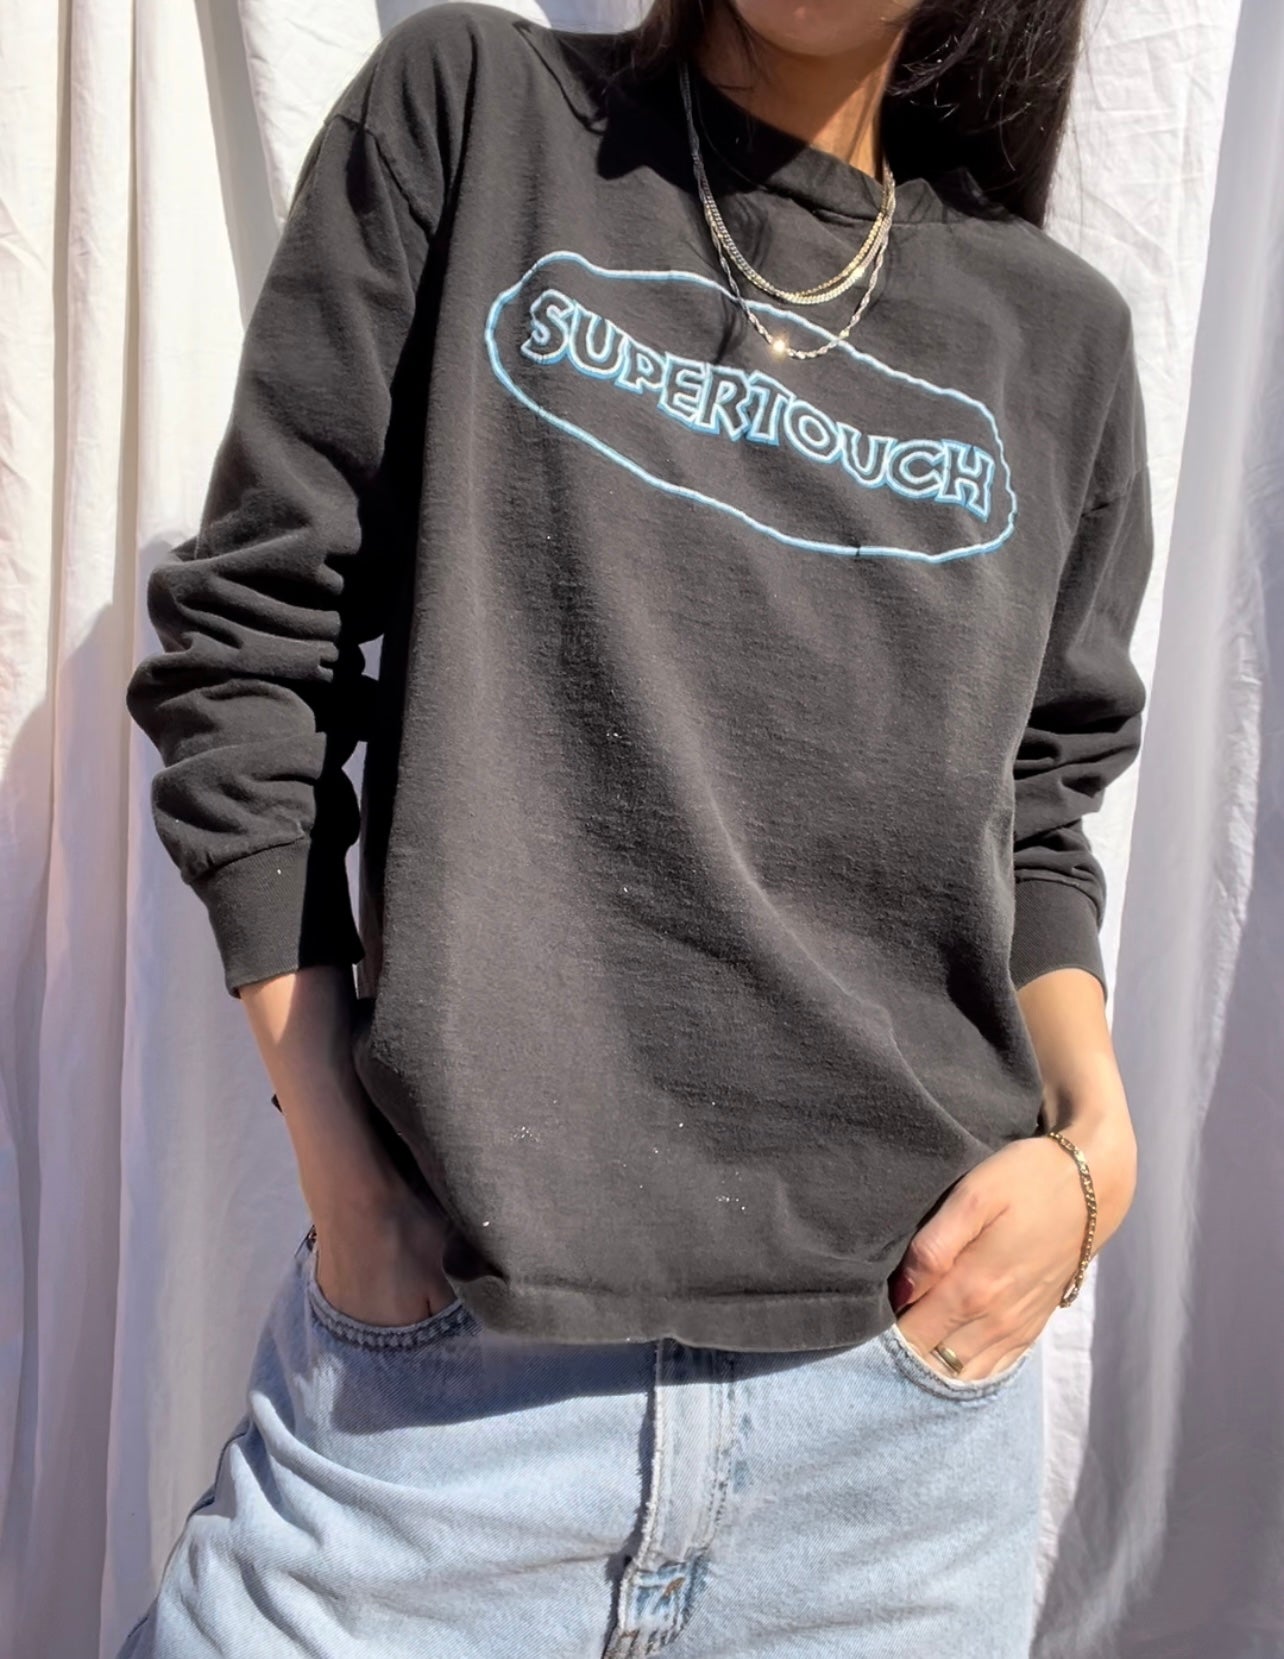 Vintage Supertouch Long Sleeve